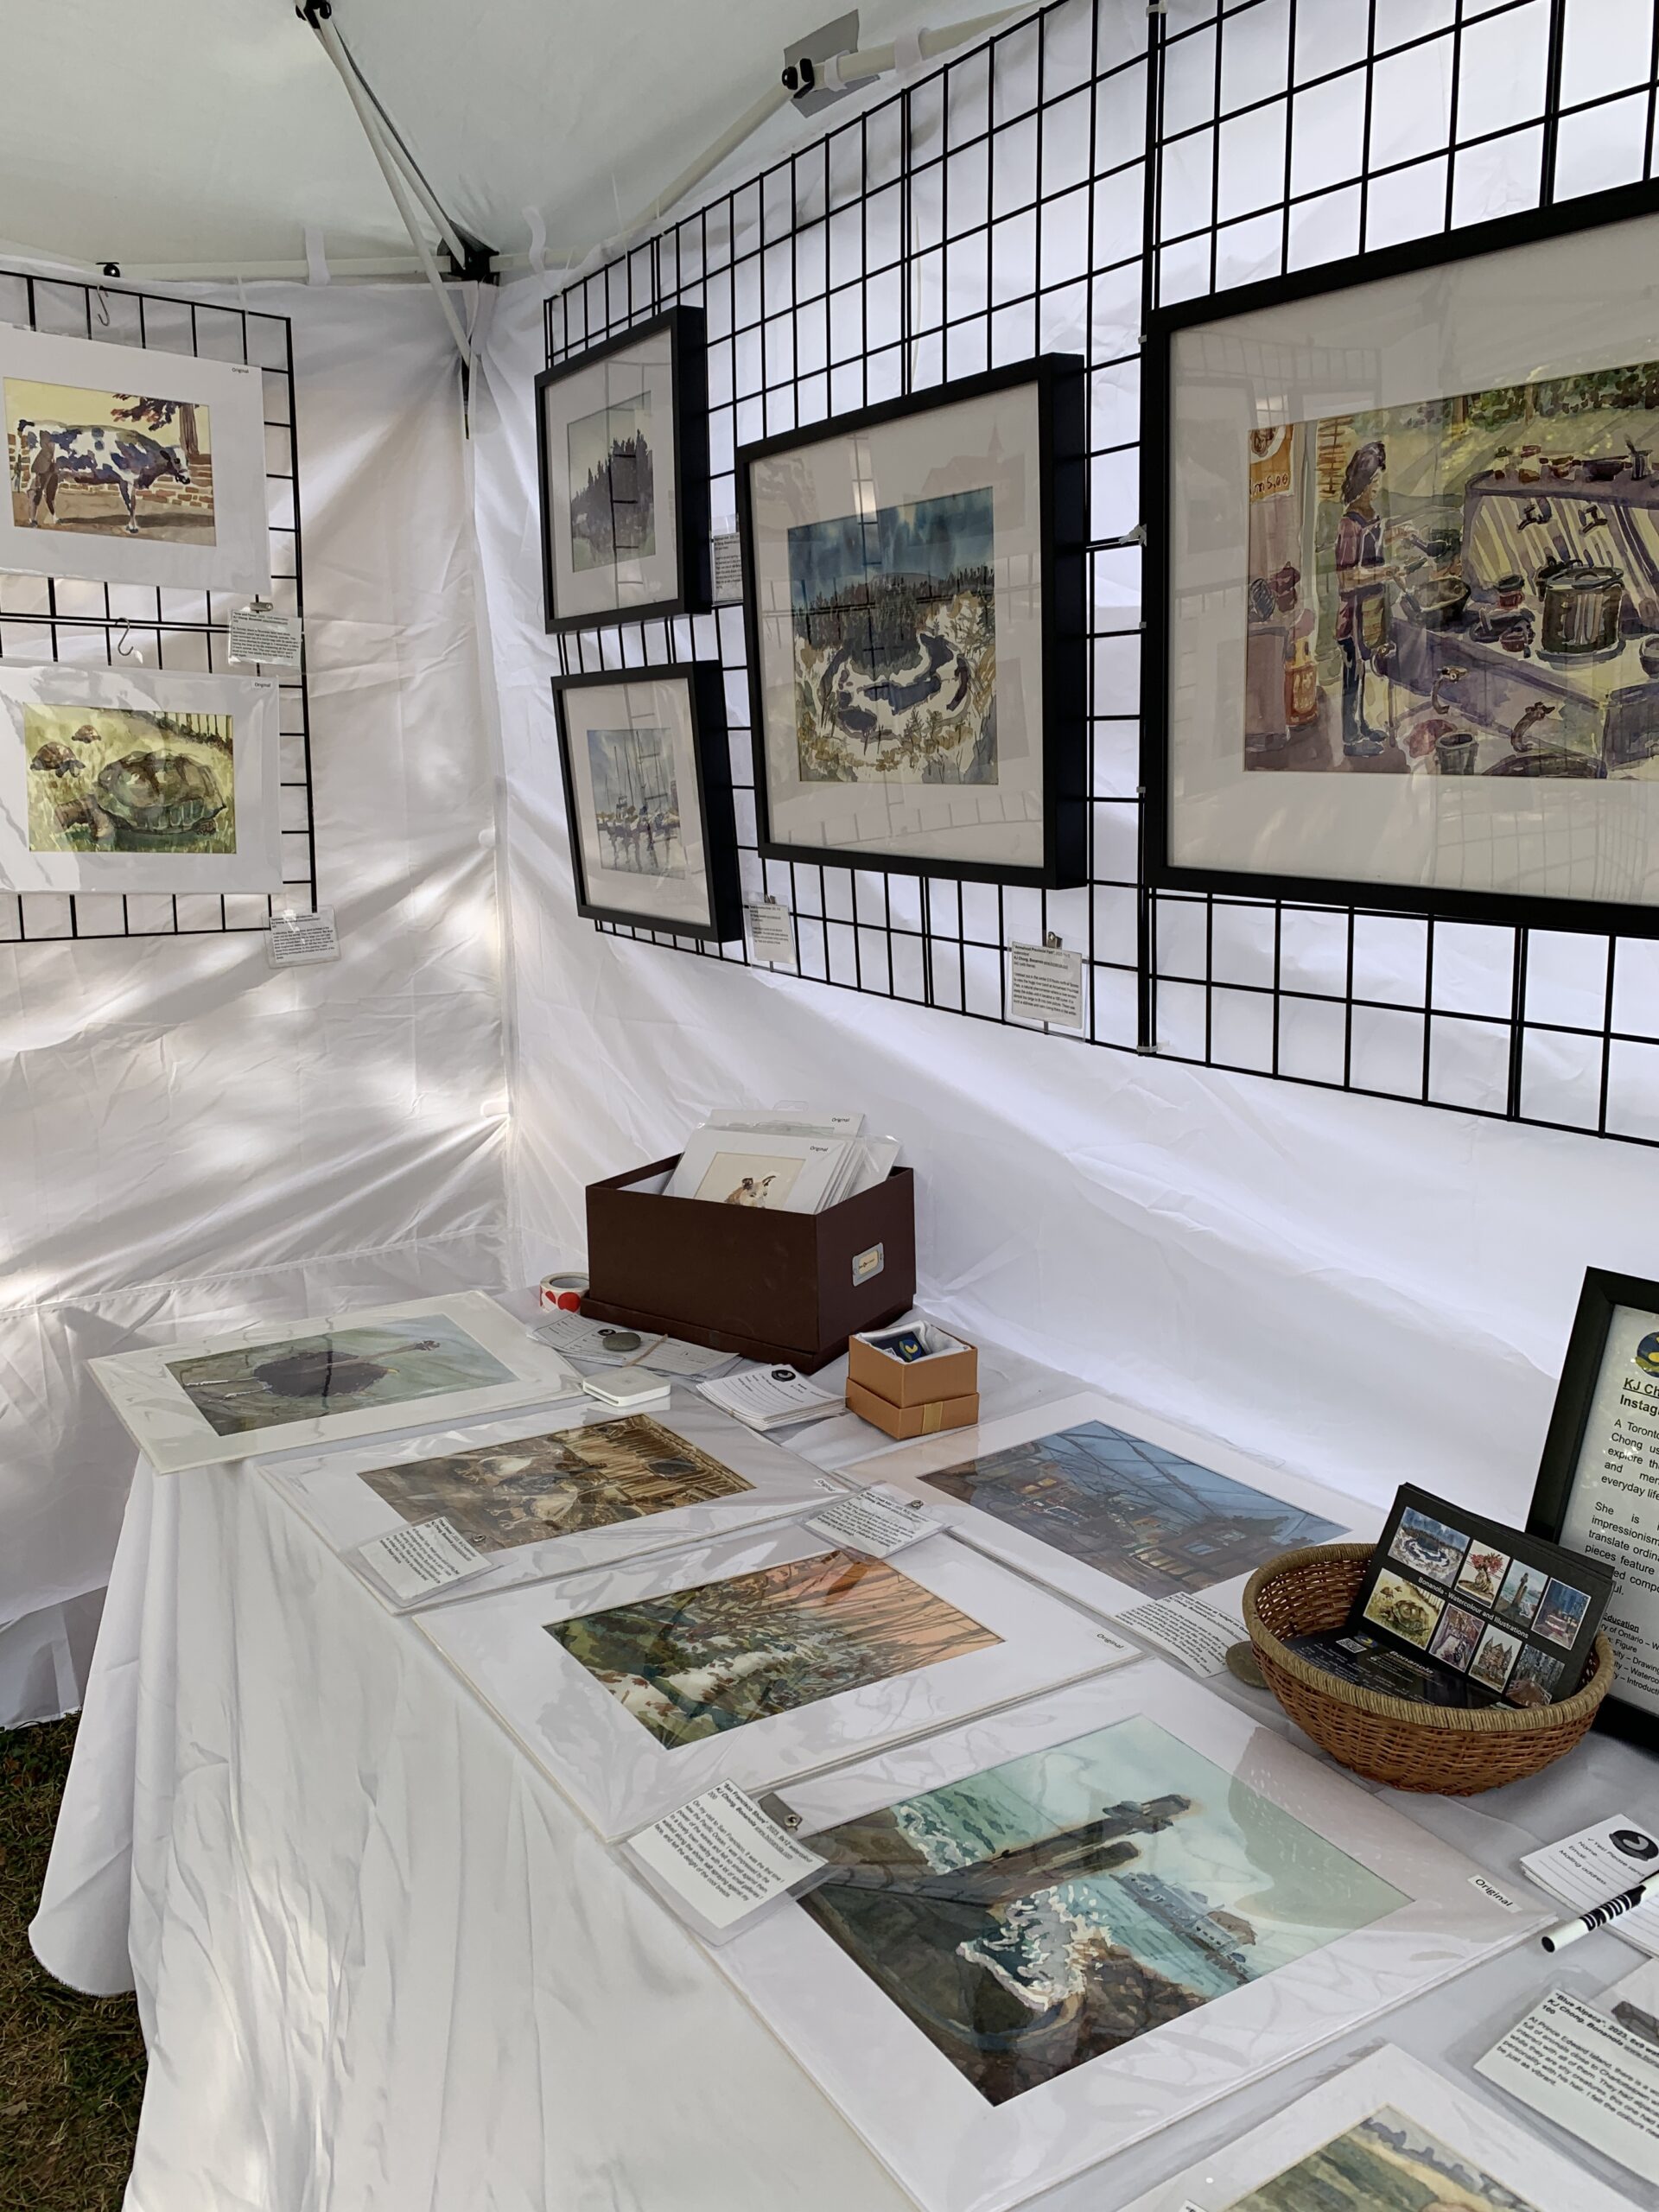 8 Tips on Your First Outdoor Art Show